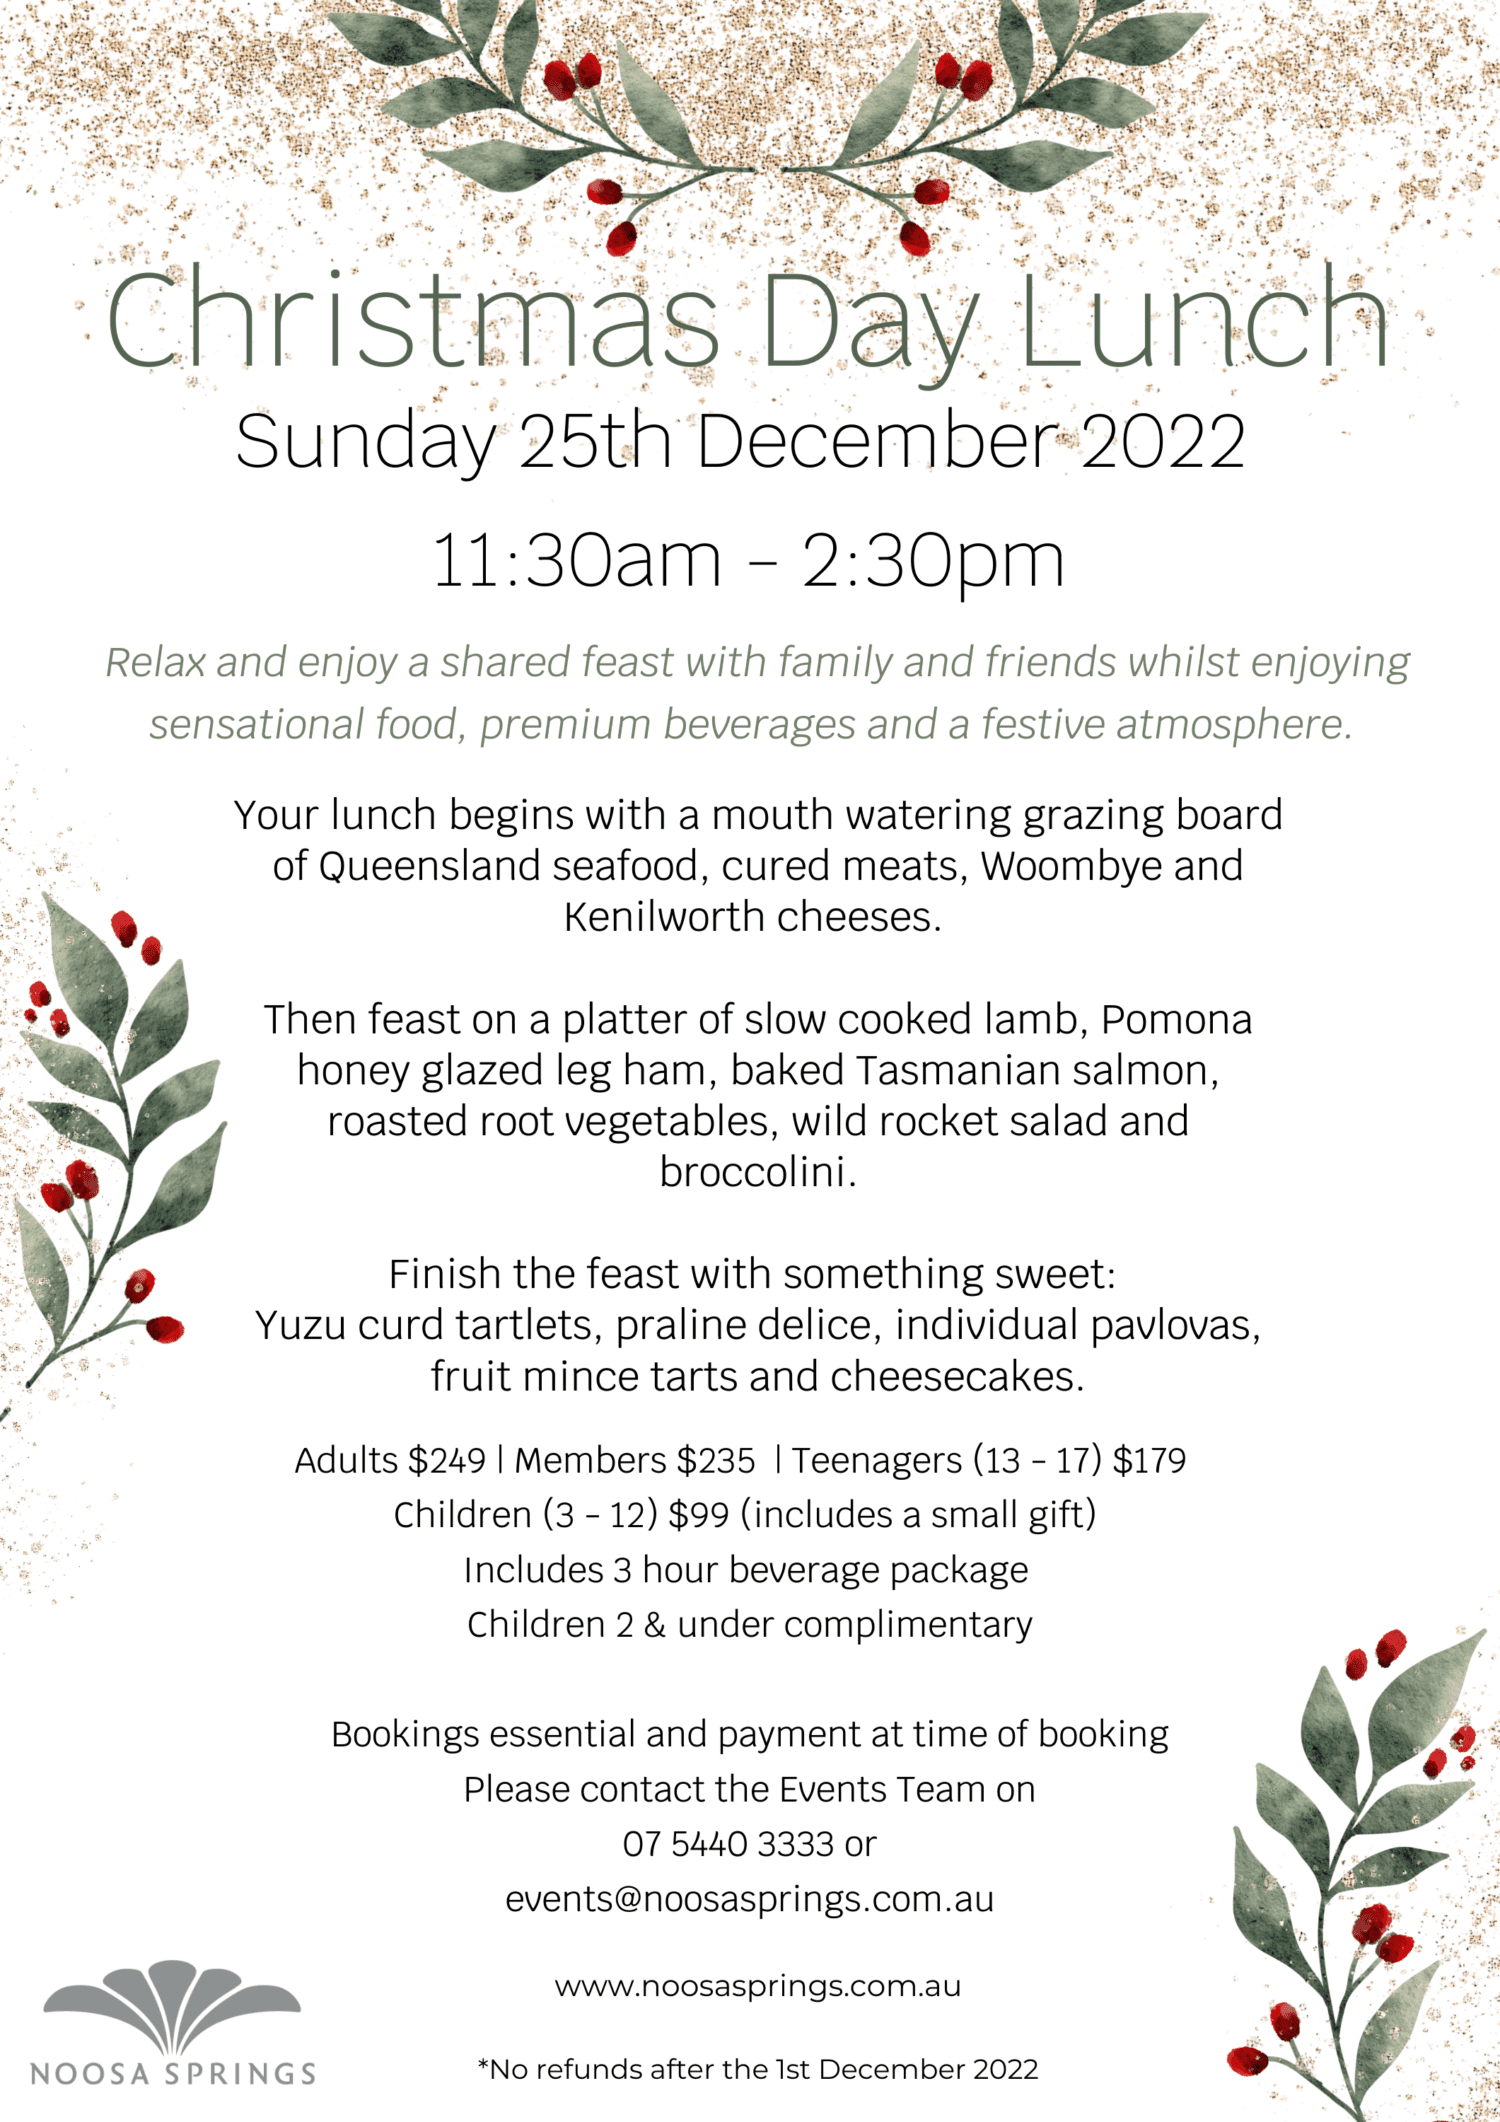 Join us for Christmas Day Lunch at Noosa Springs Noosa Springs Golf